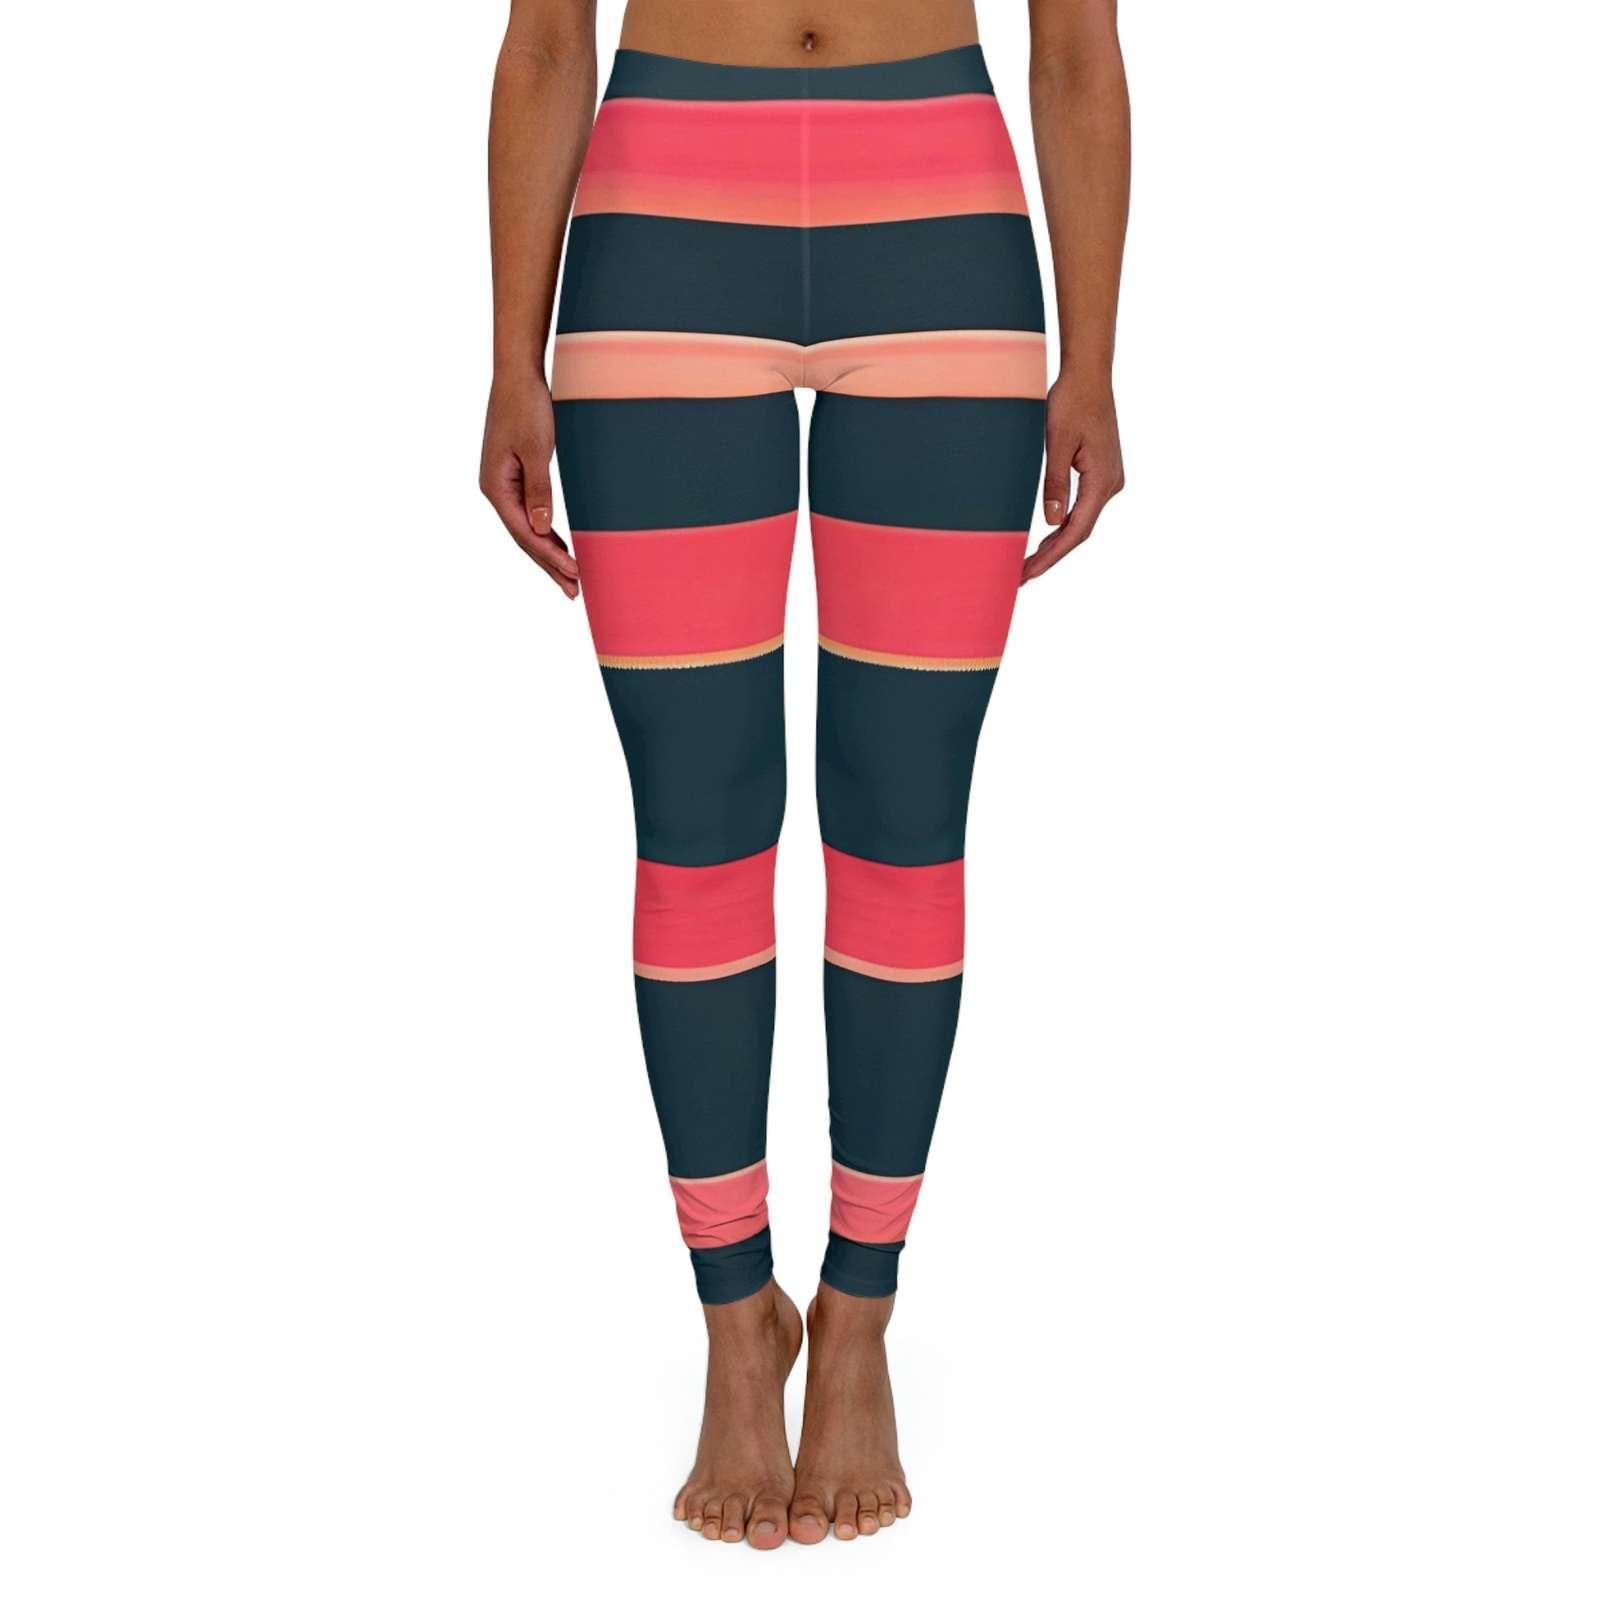 Womens leggings with Striped Pattern - Spandex leggings Soft Colorful Comfortab Product Image